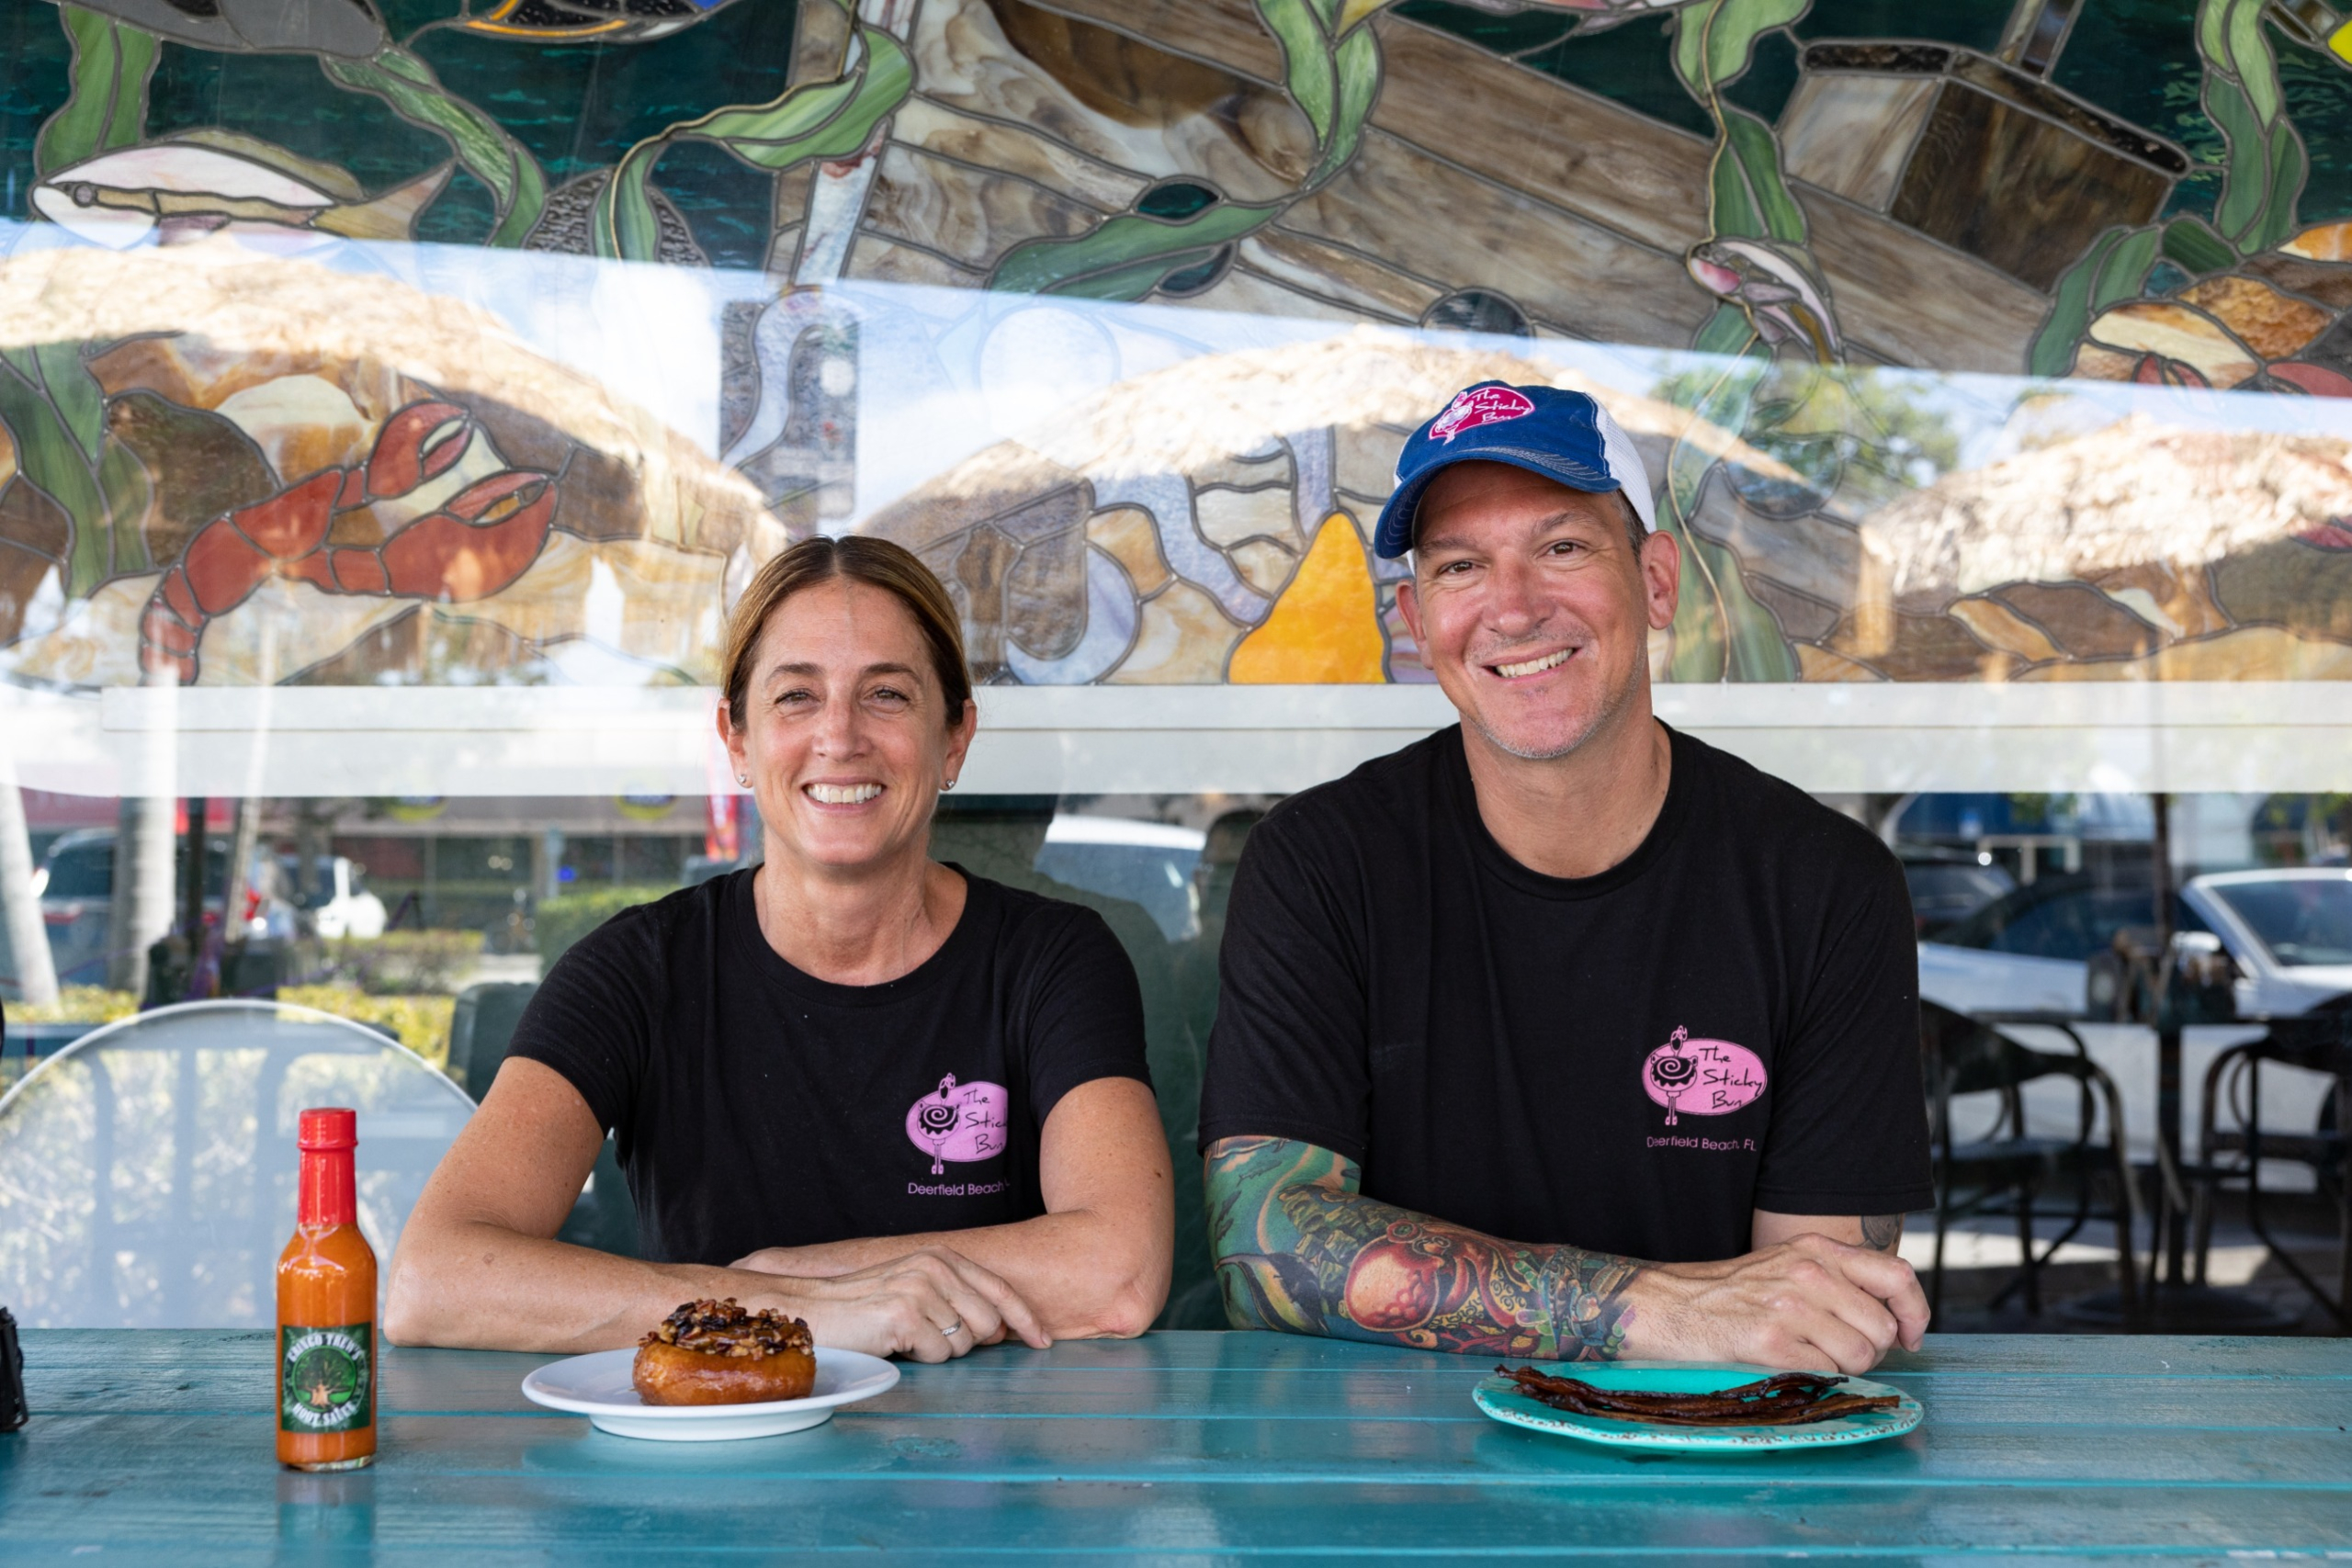 The Sticky Bun (Deerfield Beach, FL) owners Mike and Pauline.